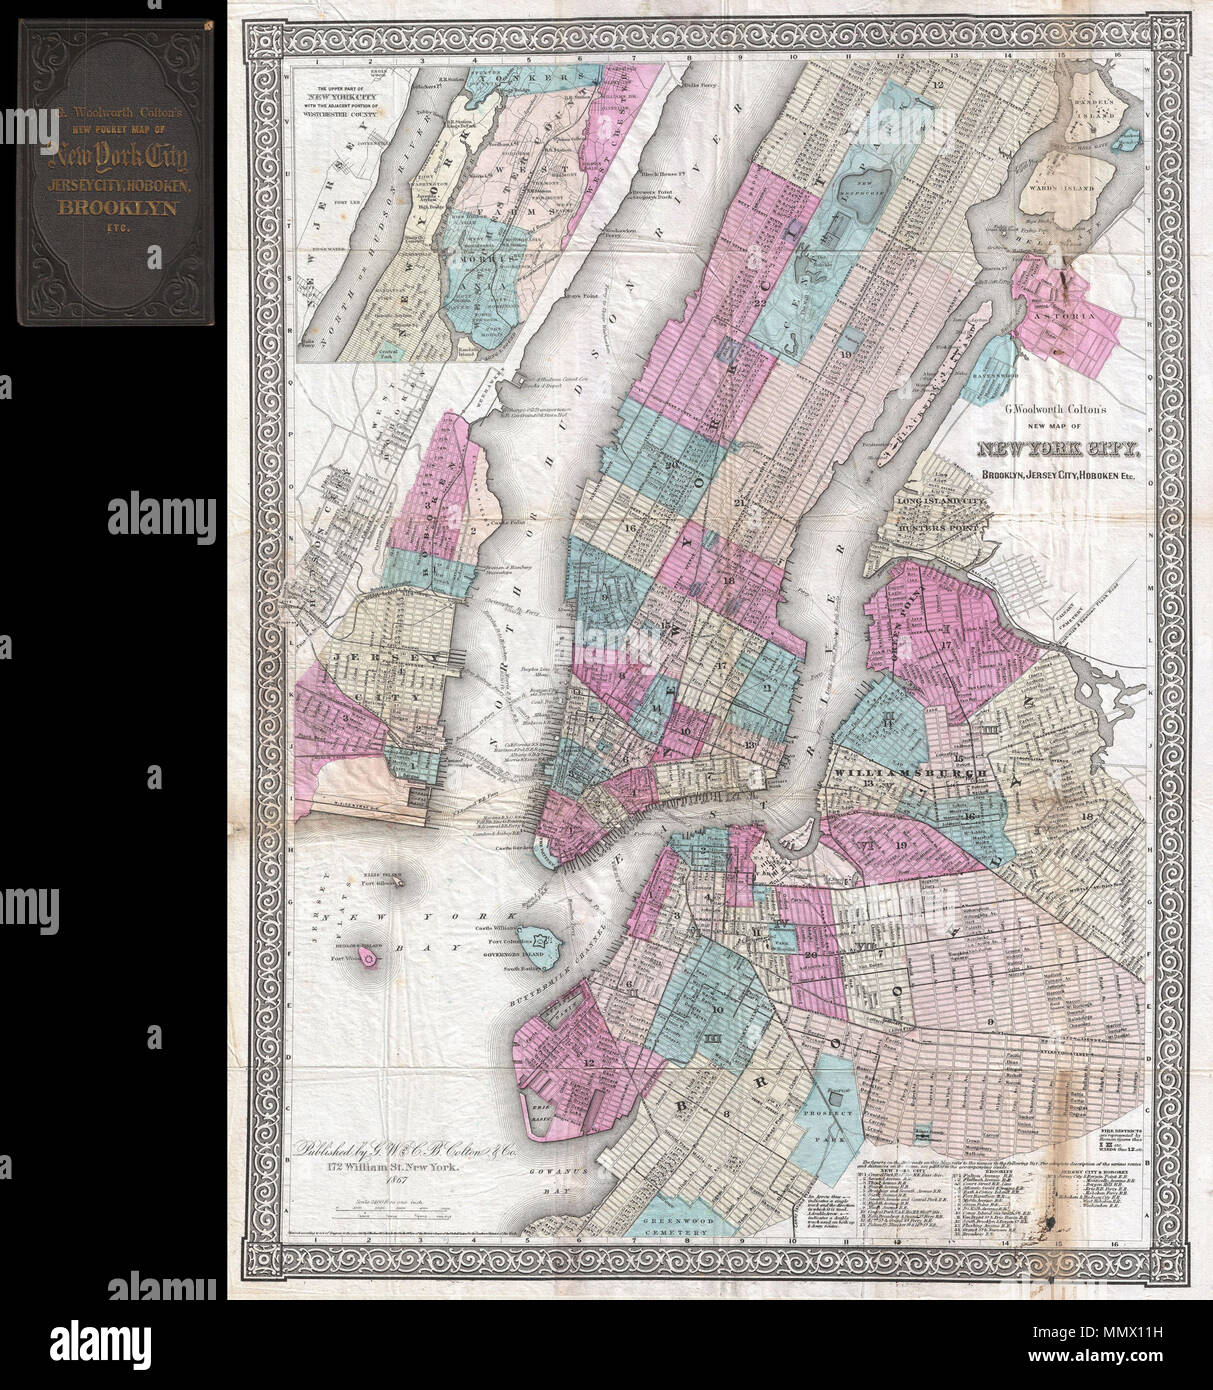 .  English: An extremely rare example of G. Woolworth Colton's 1867 vertical pocket map of New York. This important map, first issued in 1865, marks a significant rethinking of the standard Manhattan map. Previous maps of New York City tended to represent only the lower parts of Manhattan (on the Burr model) or orient the city horizontally with the top of the map facing west (as in the Commissioner's Plan). With the opening of Central Park in the mid 1860s, the previously rural northern portions of the city became not only accessible, but desirable destinations. Map publishers of the period, m Stock Photo